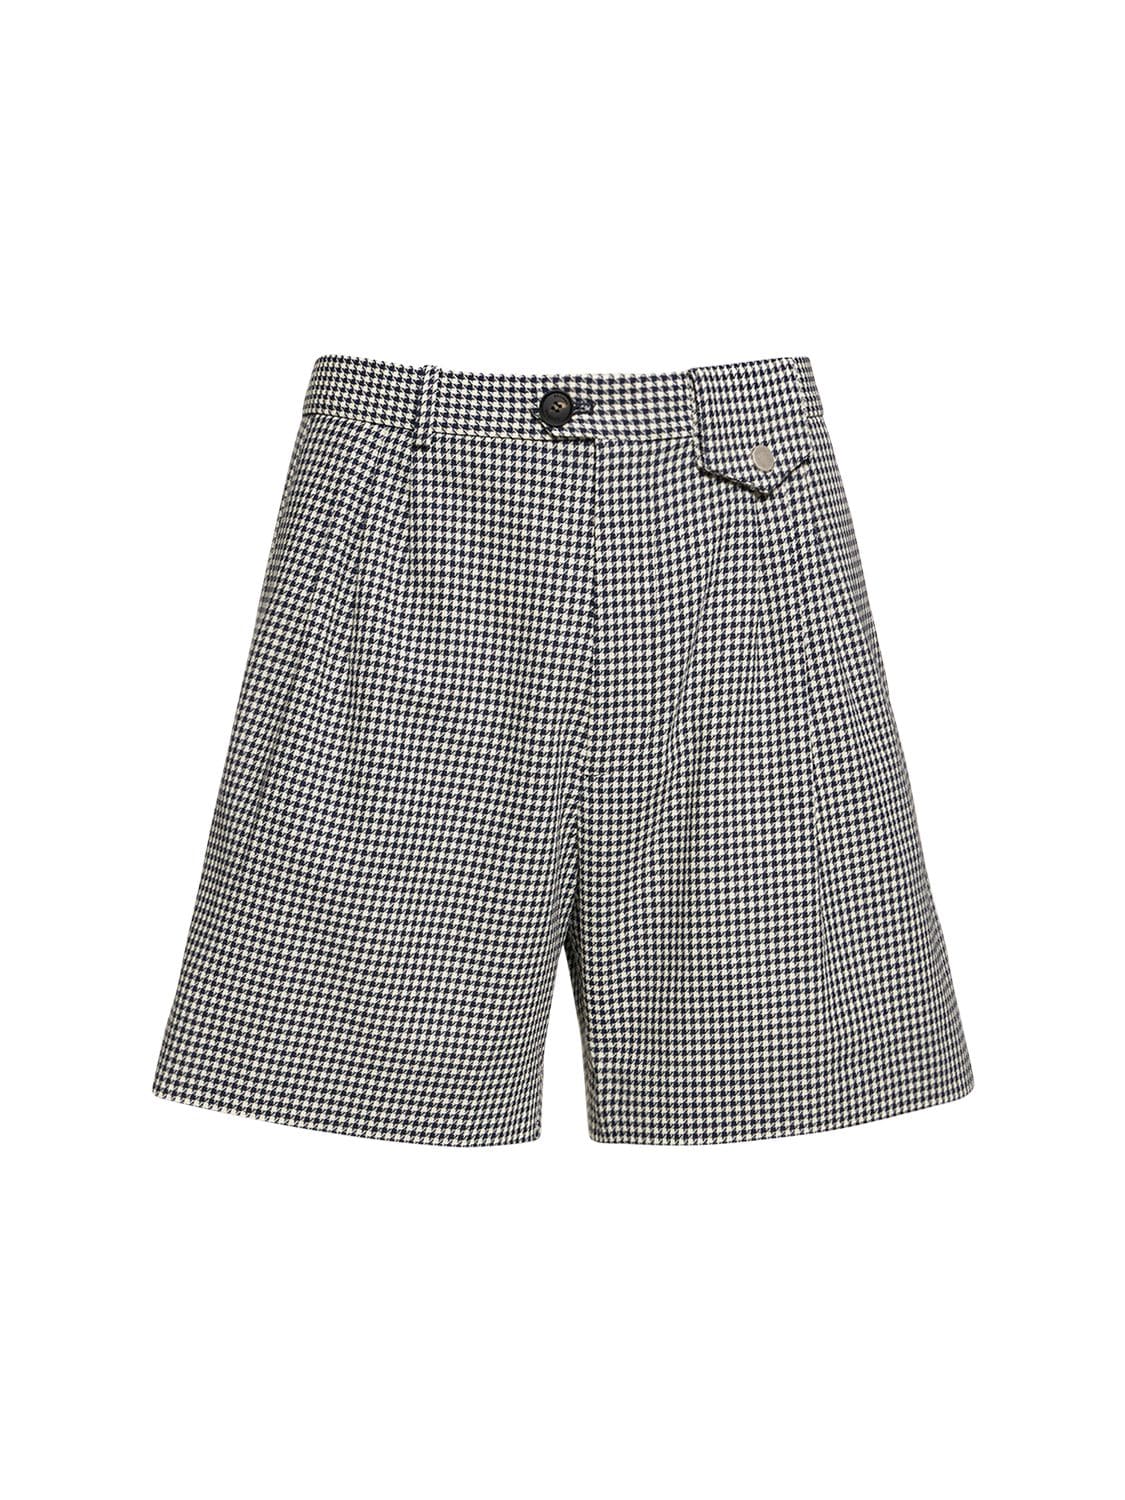 Image of Houndstooth Cotton Shorts